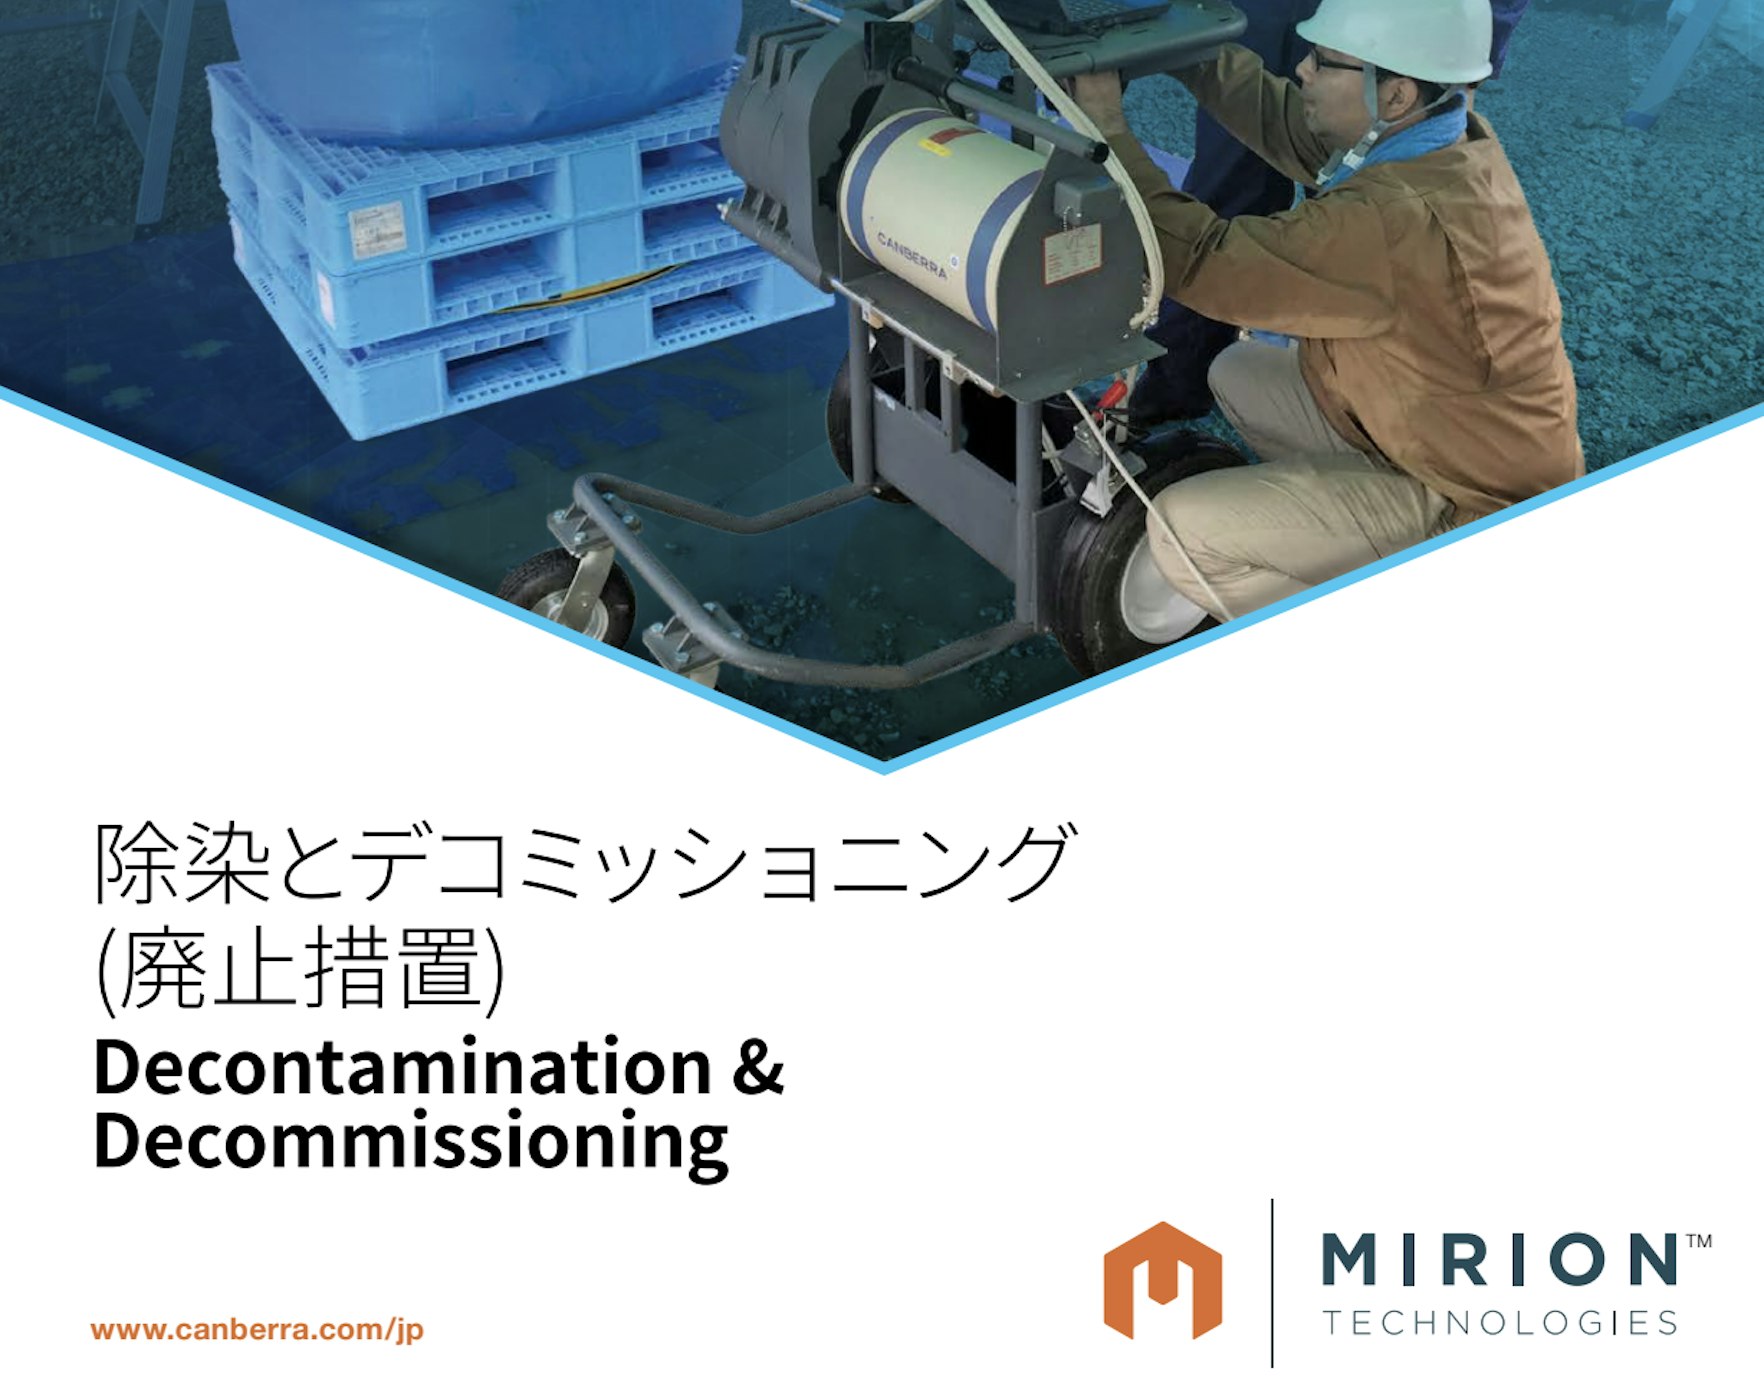 Decontamination and decommissioning brochure